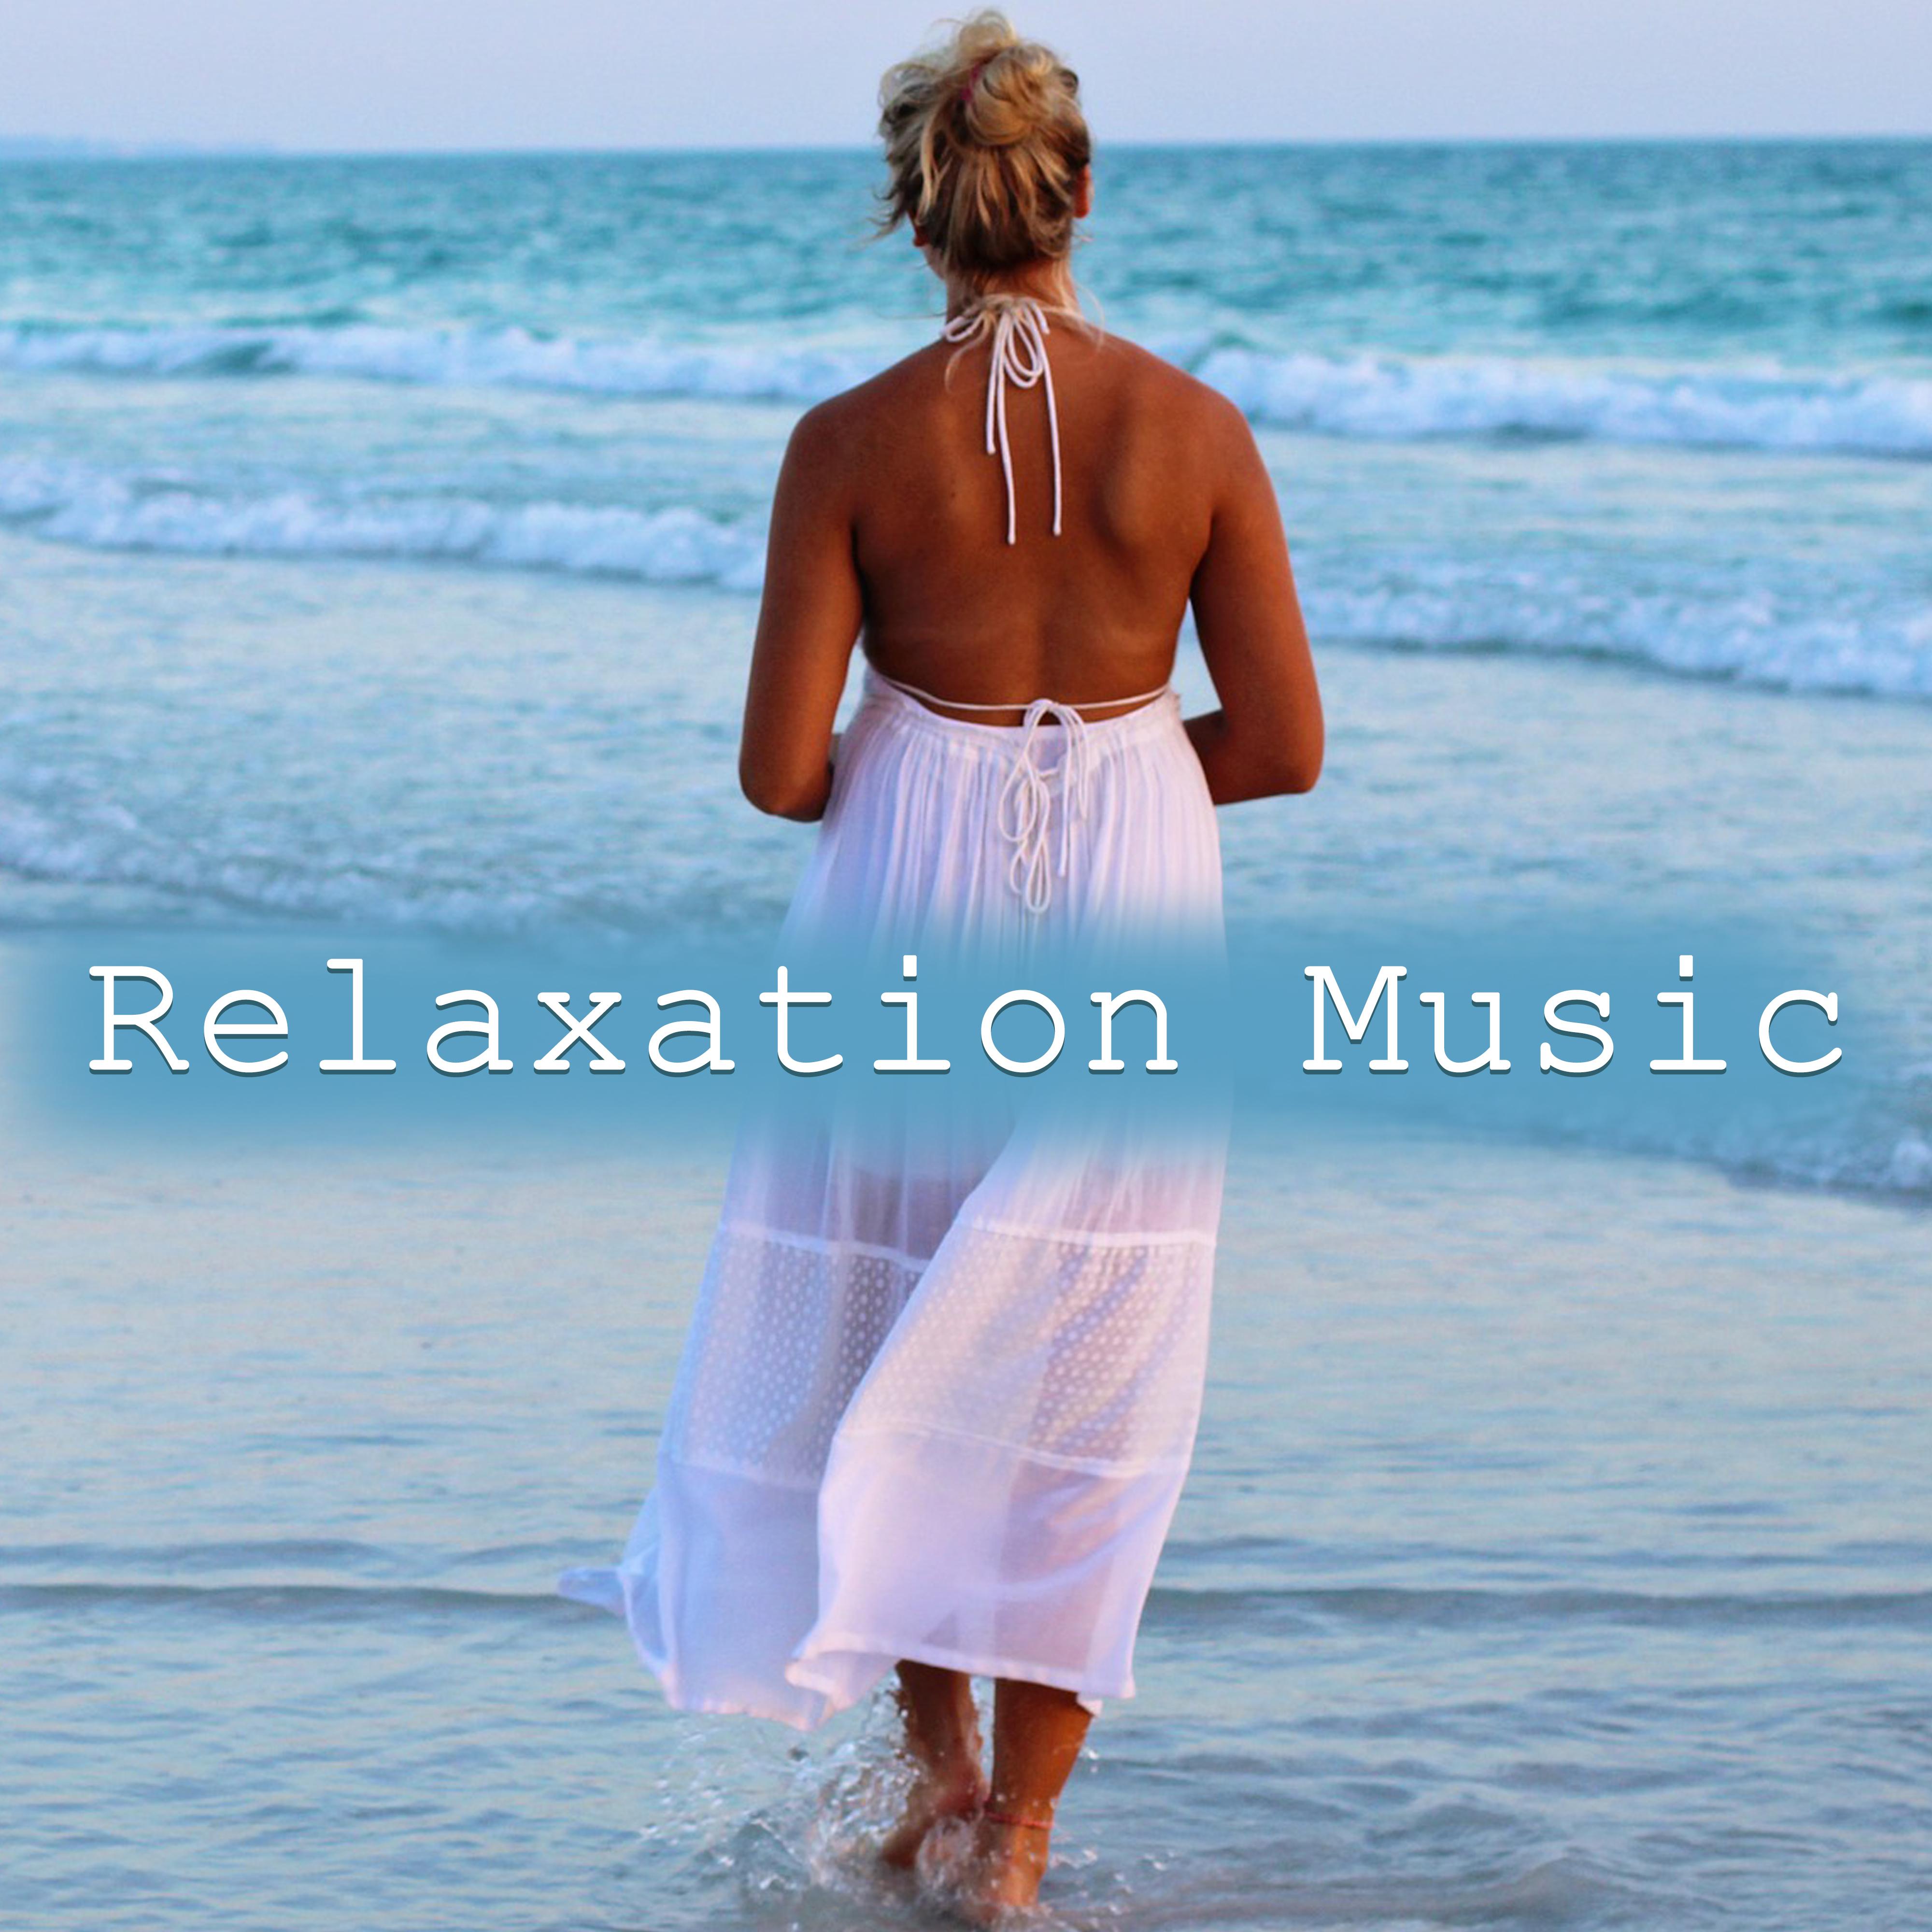 Relaxation Music – Manage Stress, Rest, Relax, Sounds of Nature, Helpful for Calm Down, Feel Better